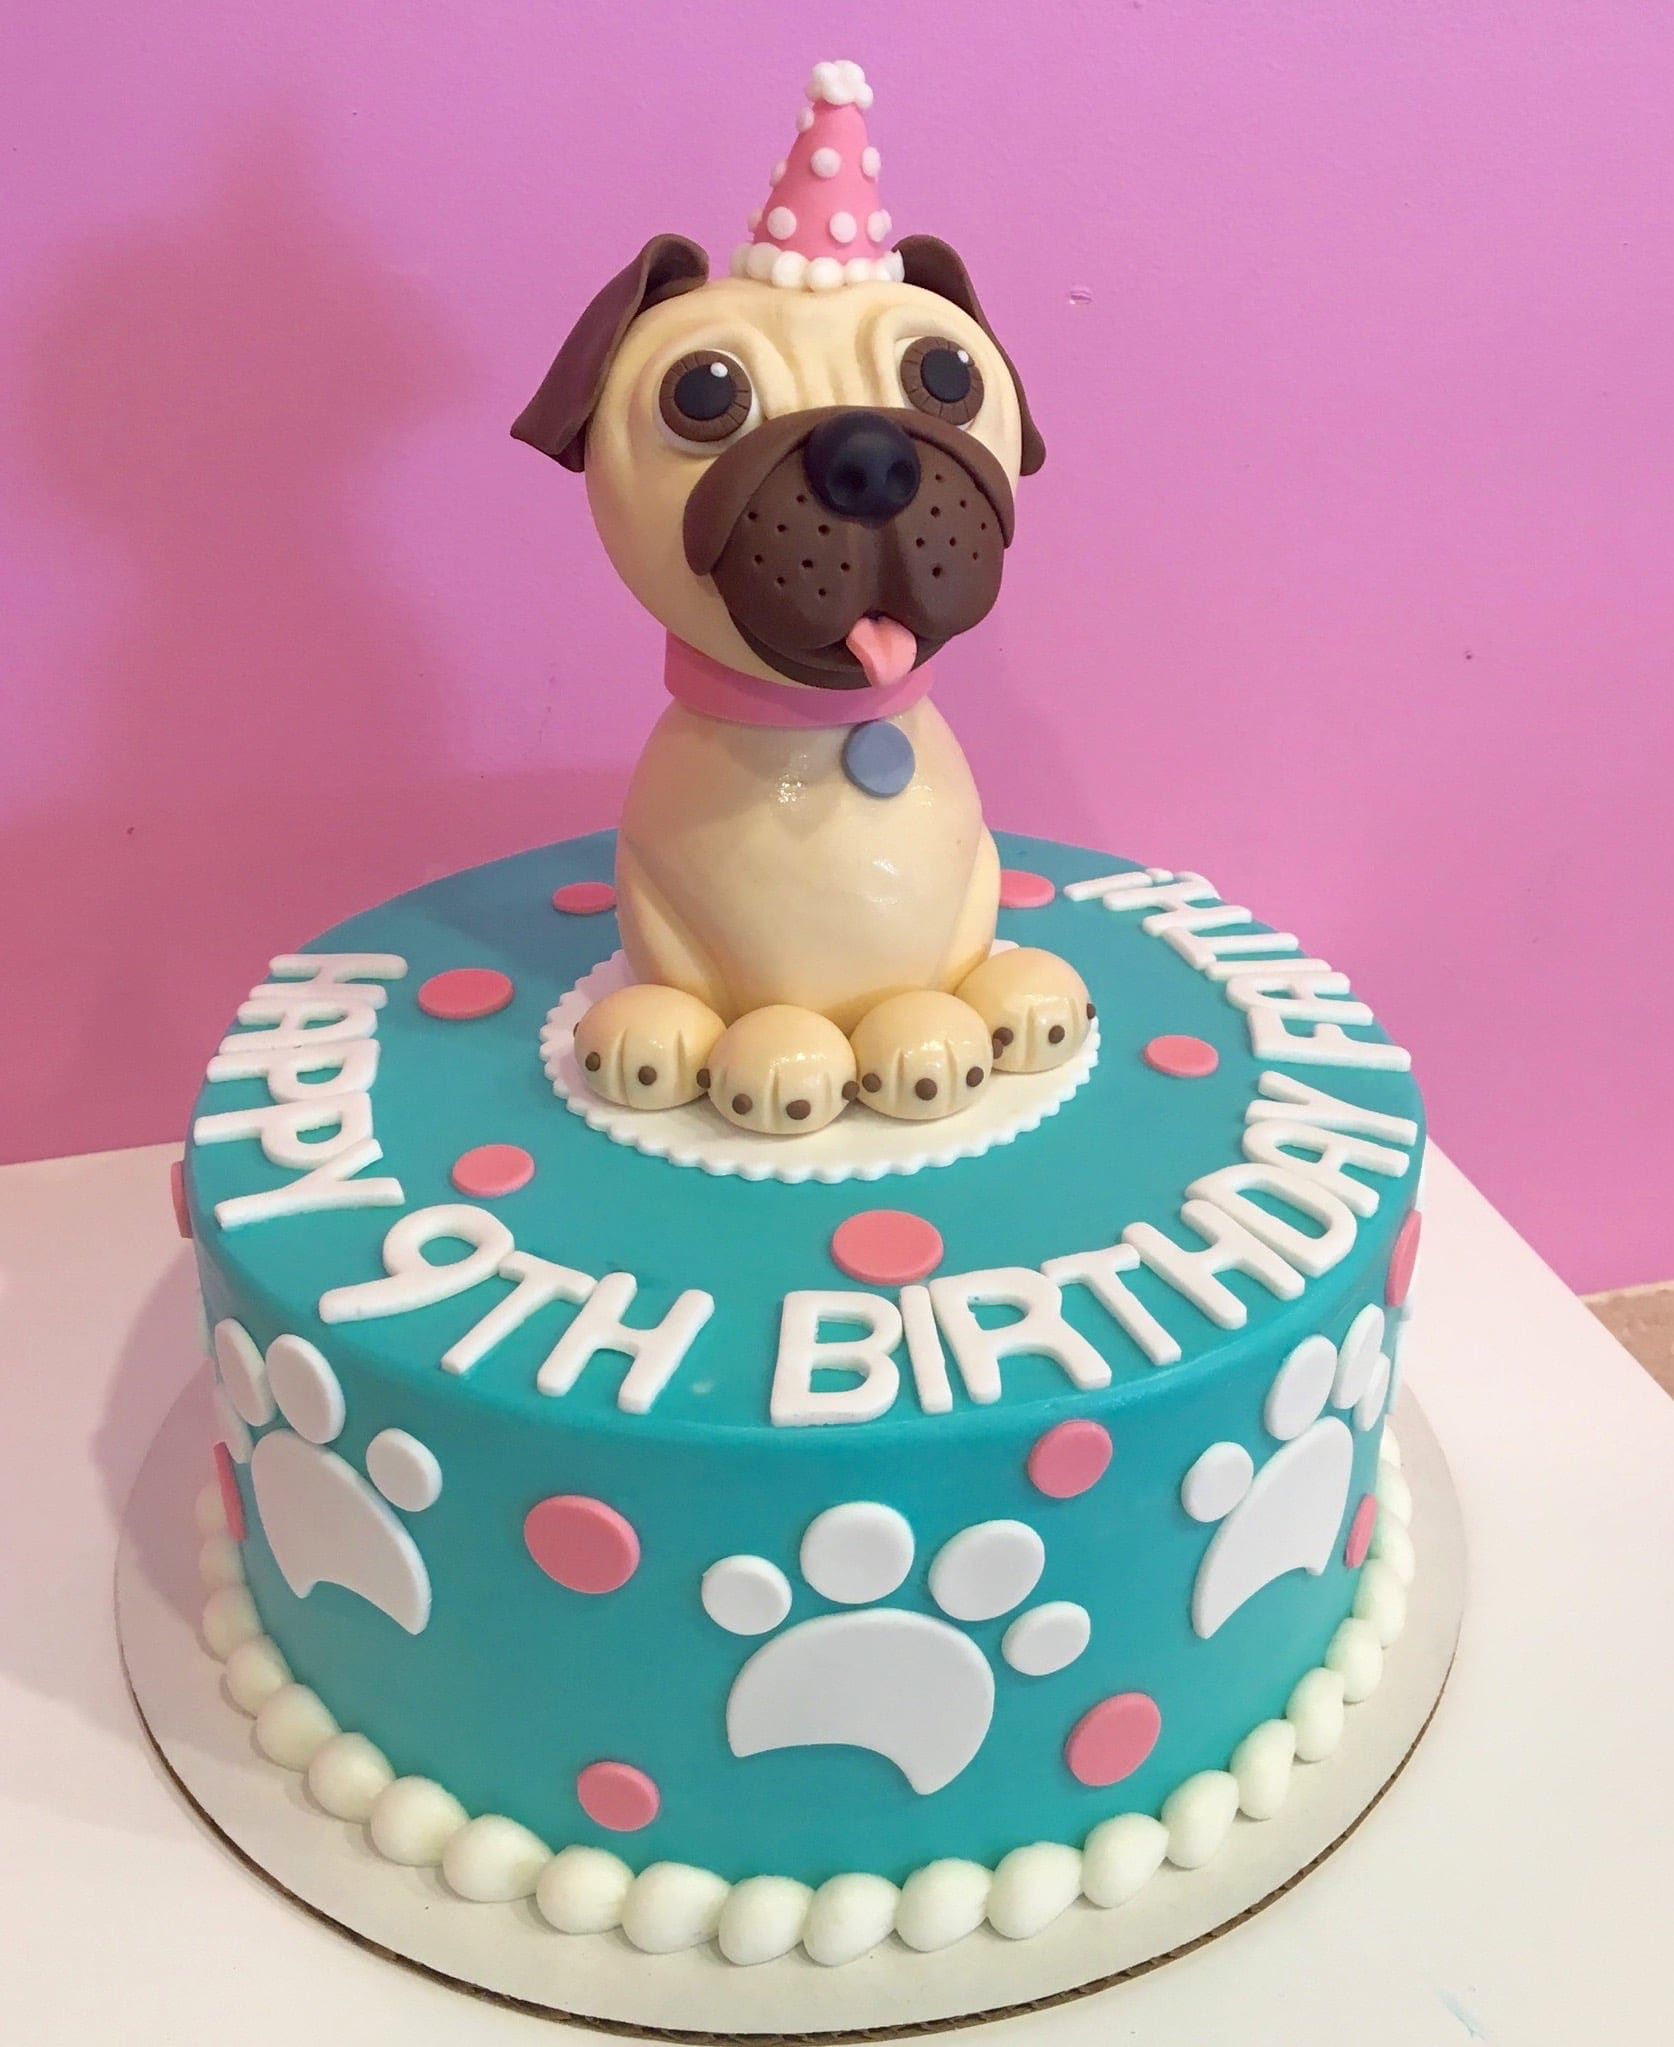 Pug Birthday Cake
 Children s Birthday Cakes that are unique and delicious